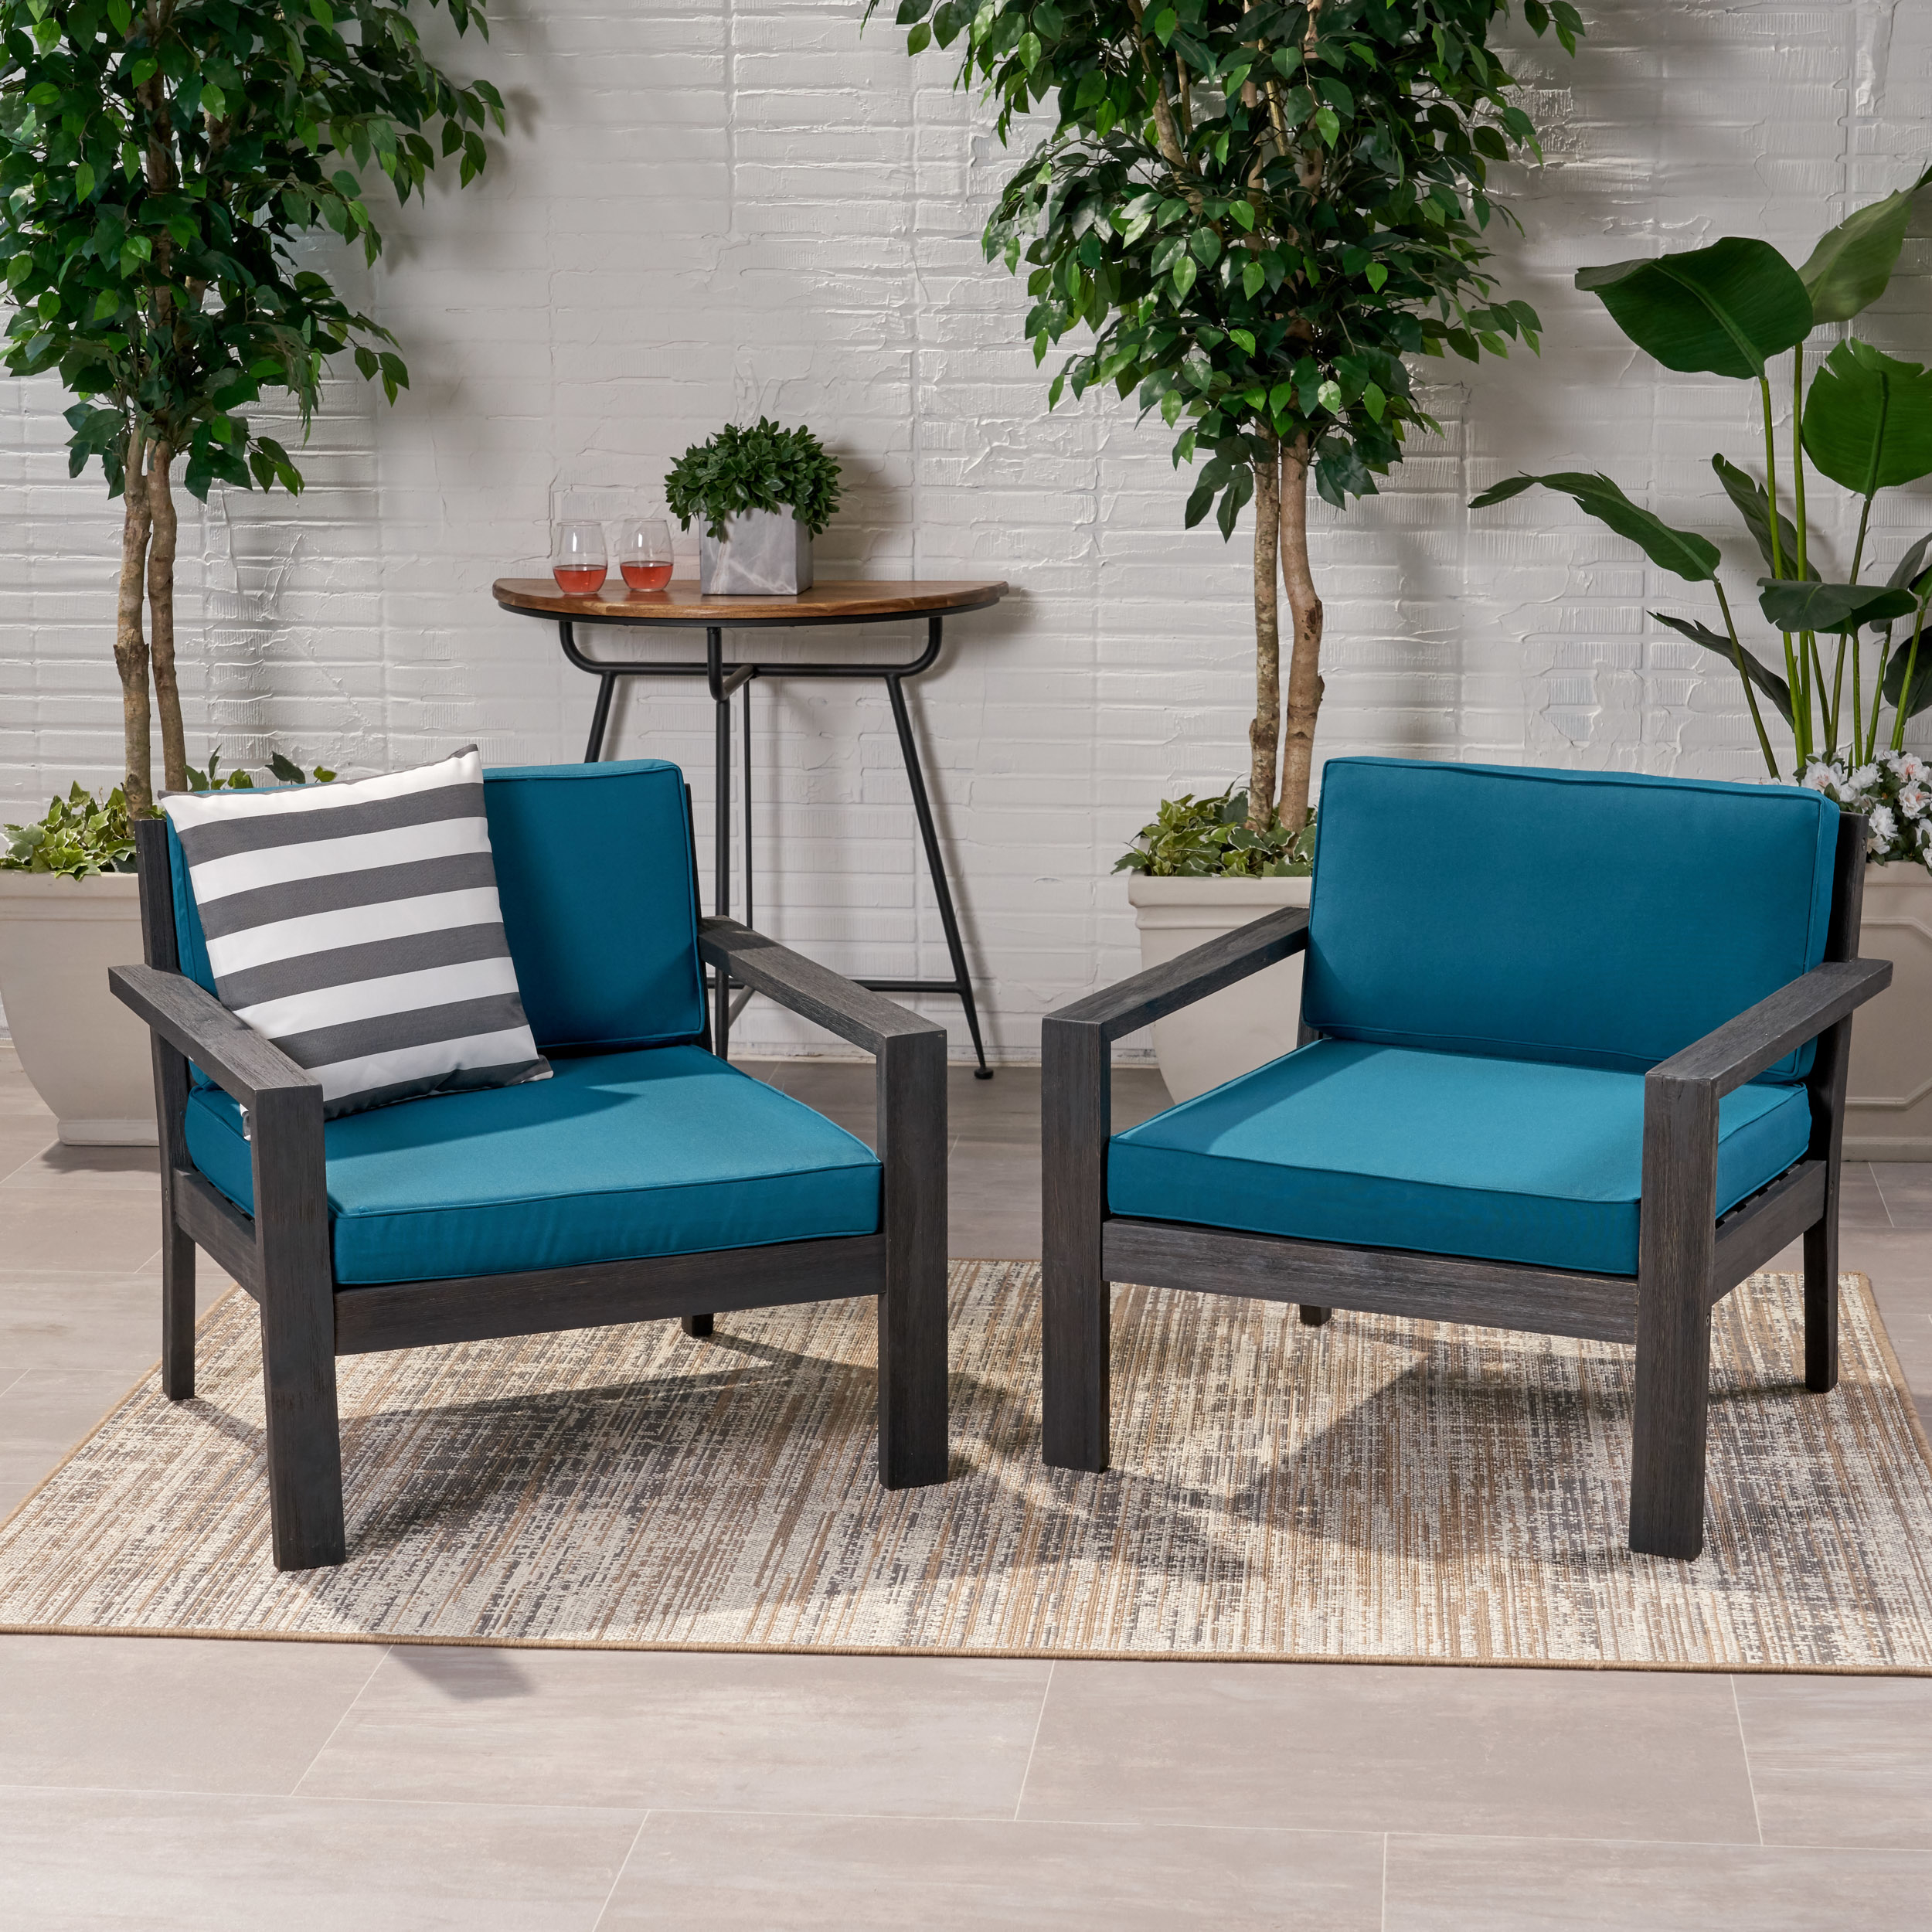 Susan Outdoor Acacia Wood Club Chairs With Cushions (Set Of 2) - Brushed Dark Gray Finish, Dark Teal